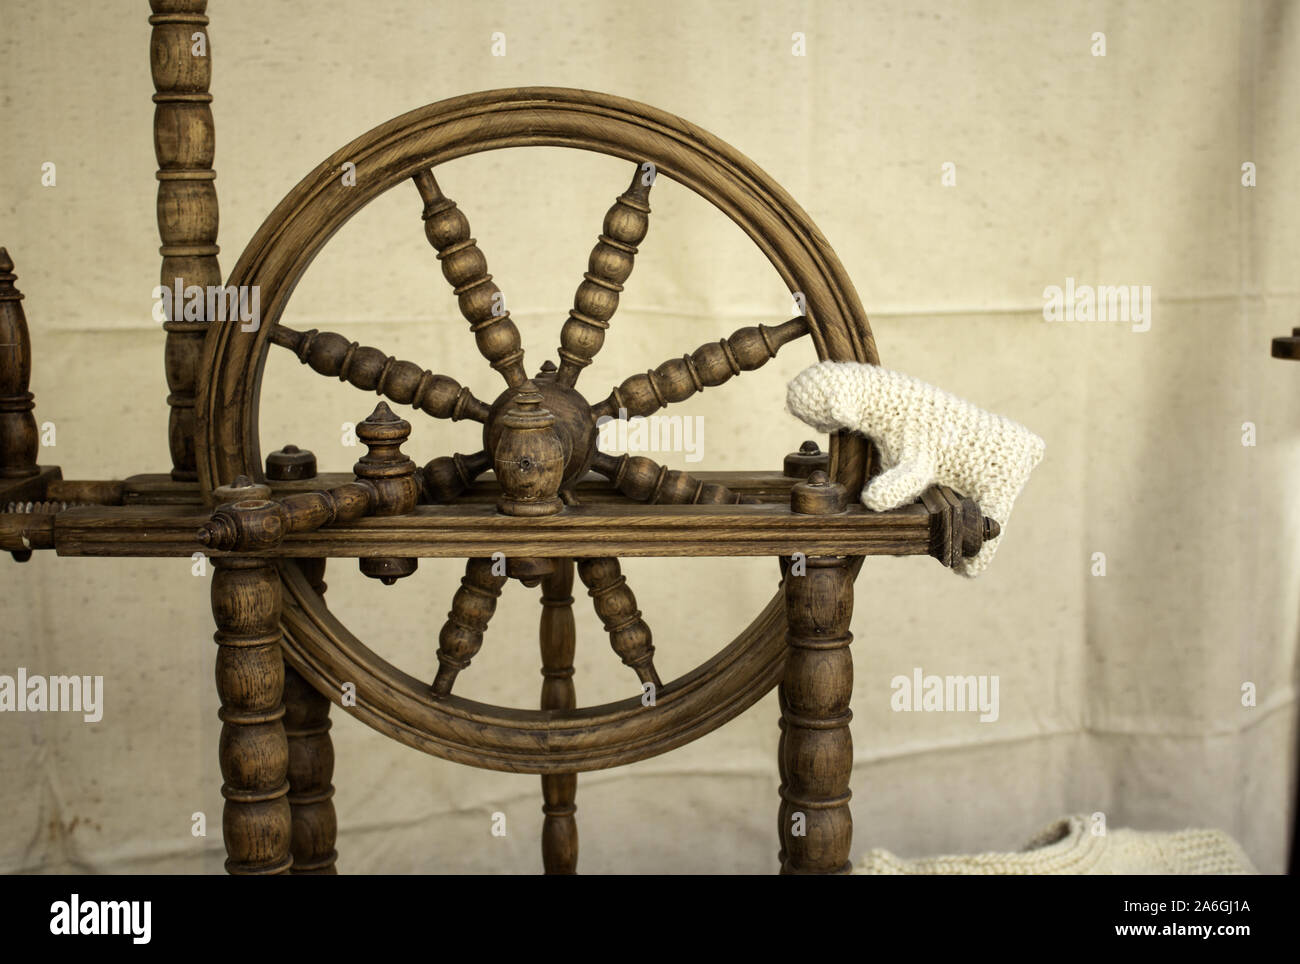 Spinning Wheel for Making Yarn from Wool Fibers. Vintage Rustic Stock Photo  - Image of distaff, historical: 111700304